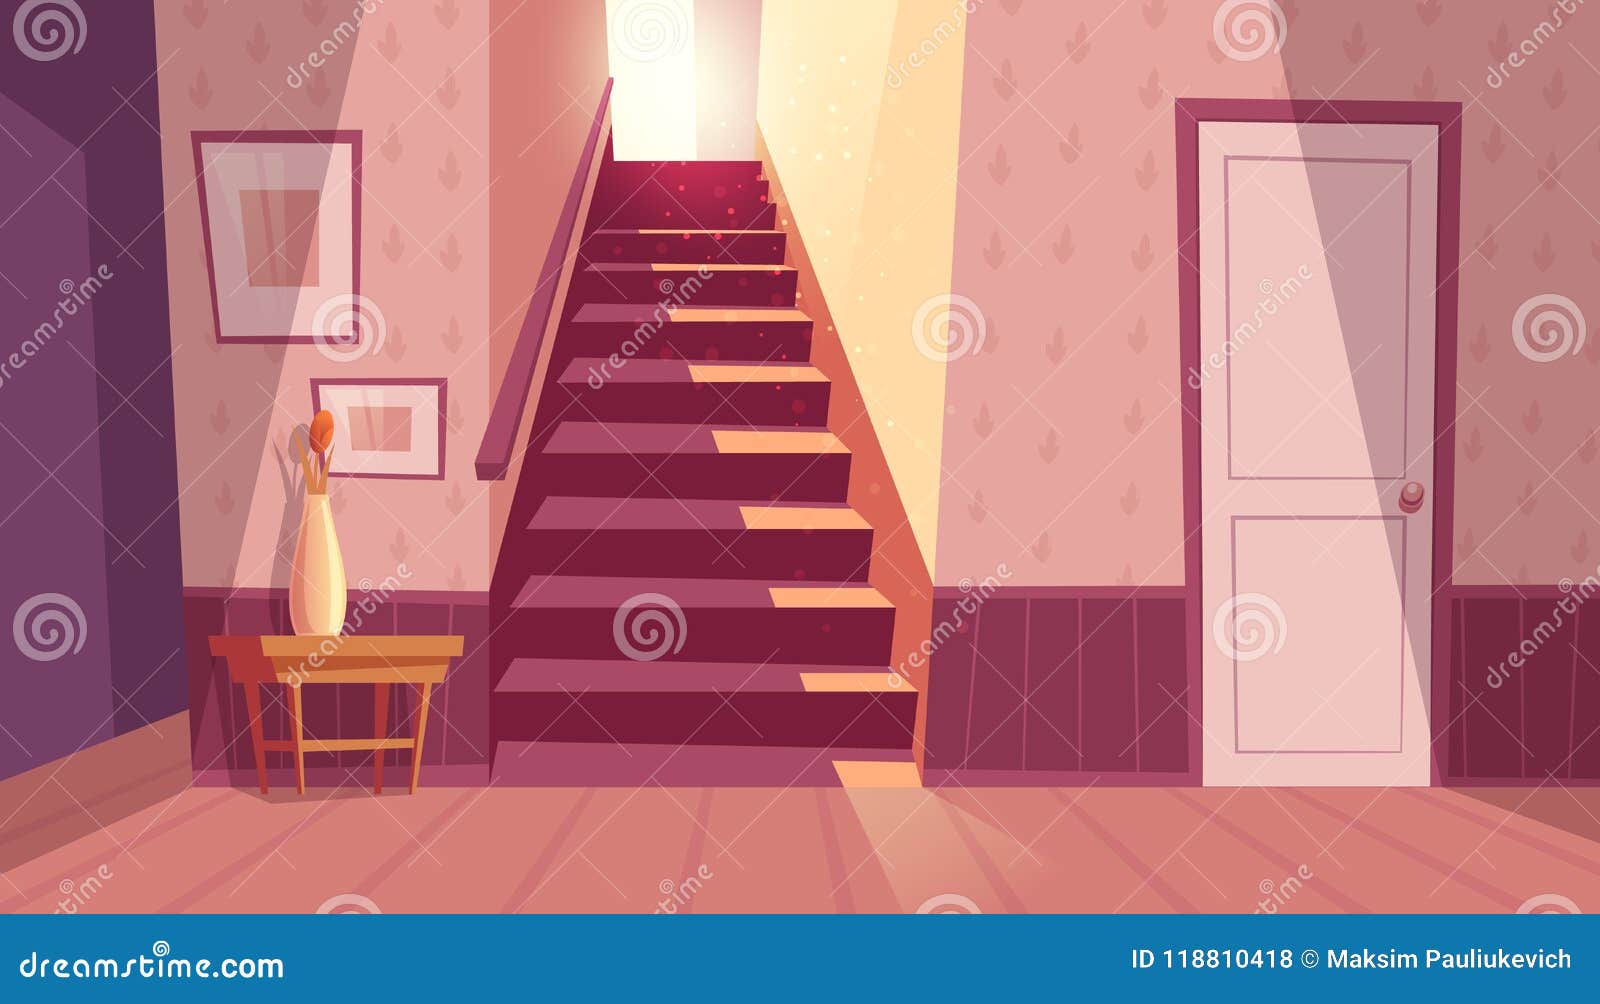  interior with staircase, stairs in house